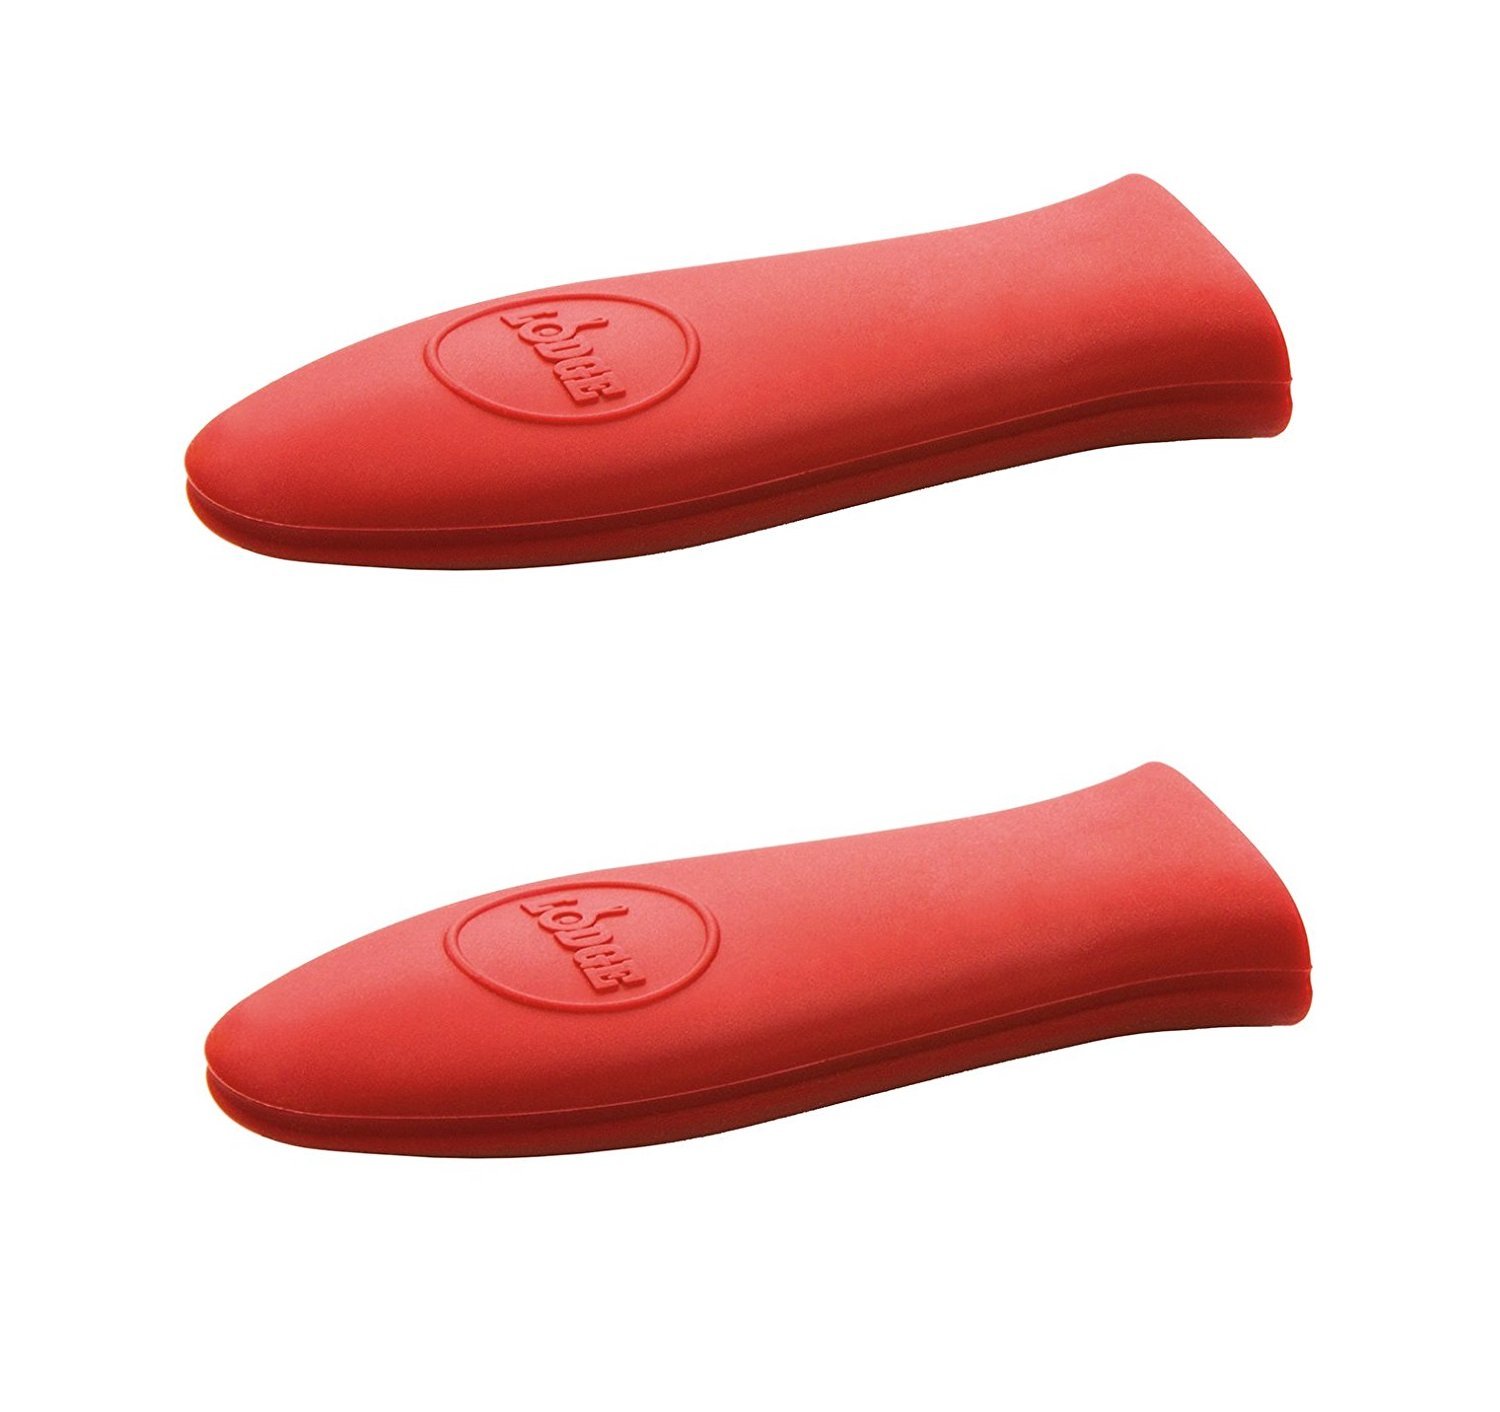 Lodge Silicone Hot Handle Holder Oven Pan Mitts Heat Protecting Silicone Cast Iron Skillet Dutch Oven (Red 2 Pack)